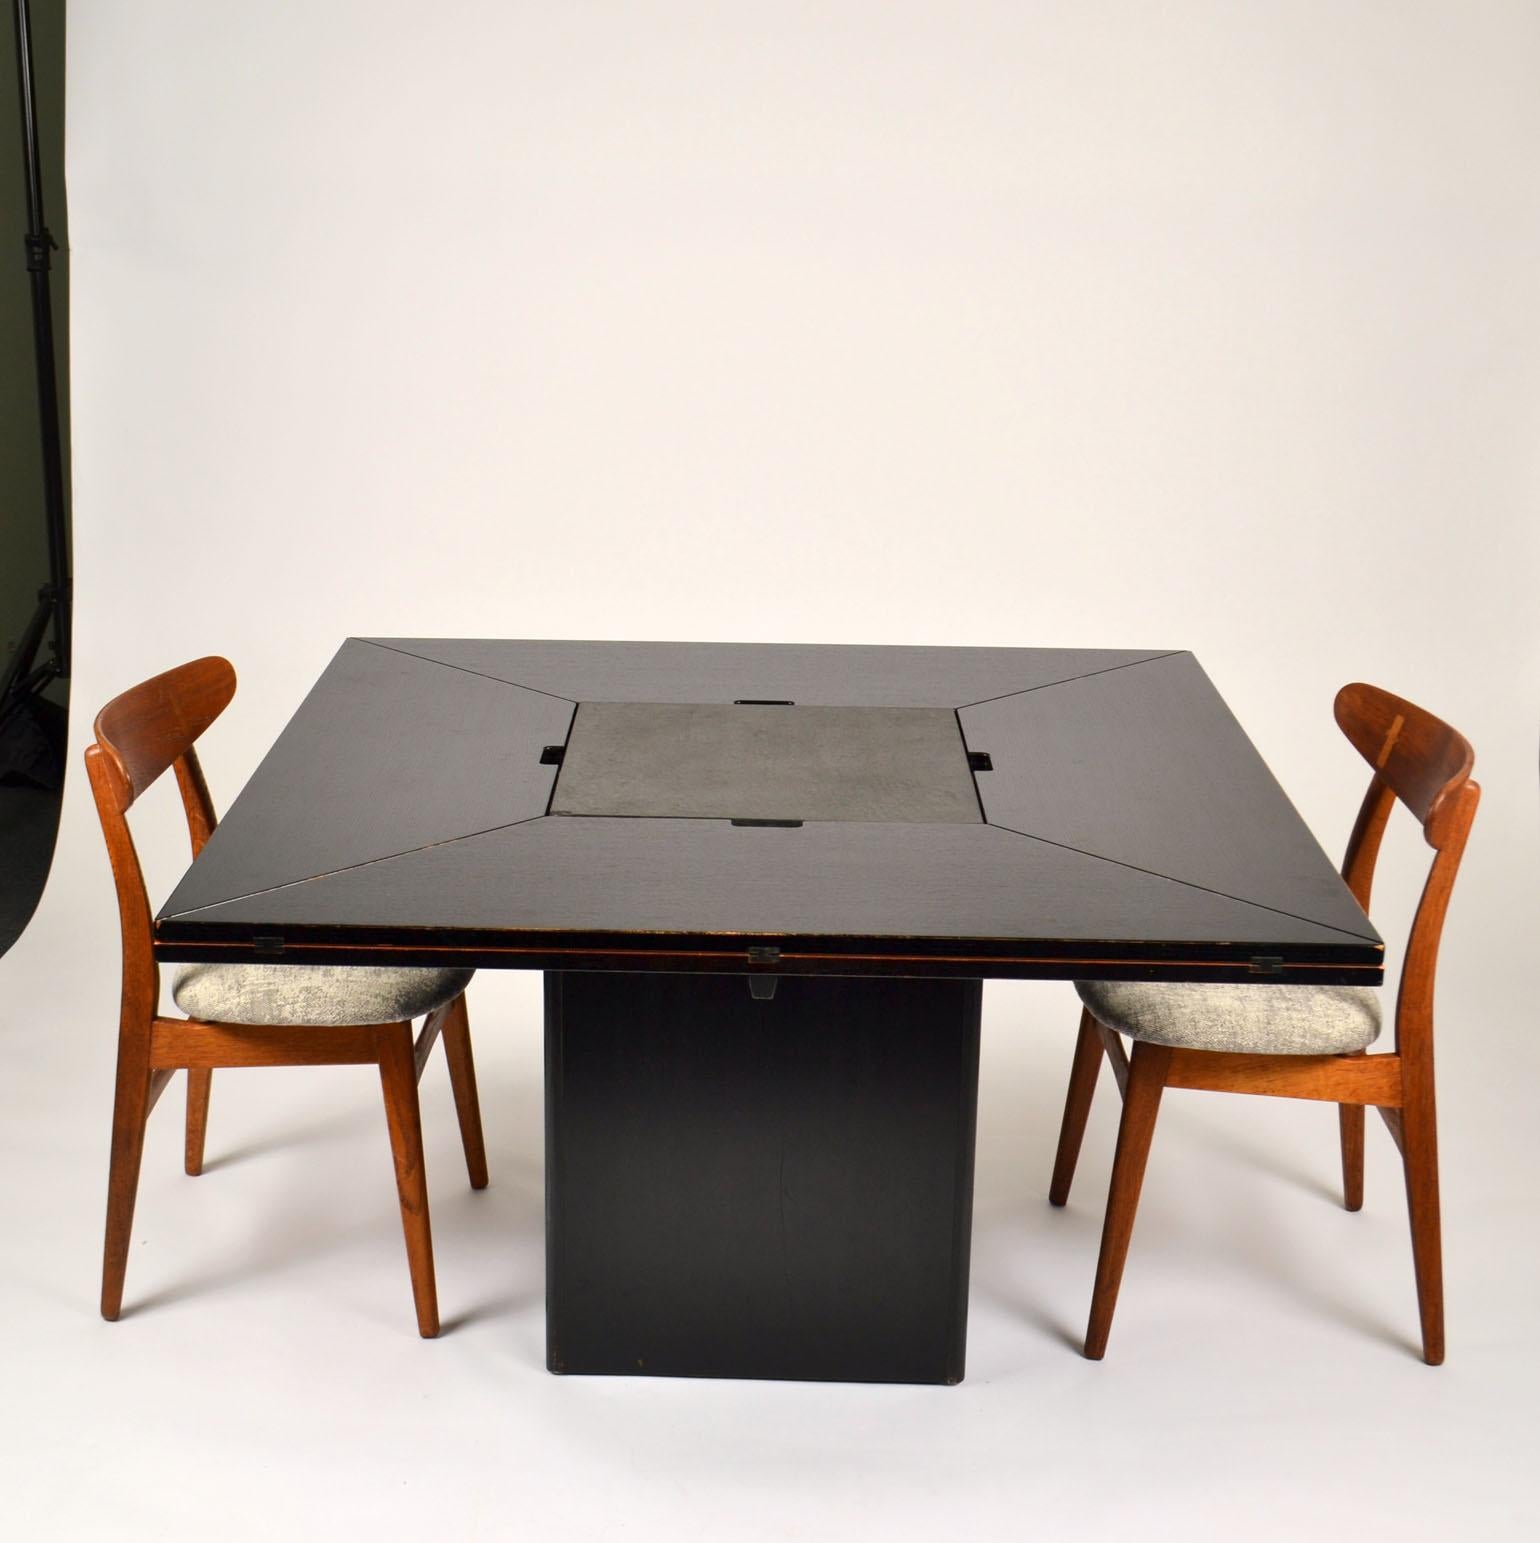 Circante Square Dining Table for 8-12 Seatings by Pauvers van den Berghe In Excellent Condition For Sale In London, GB